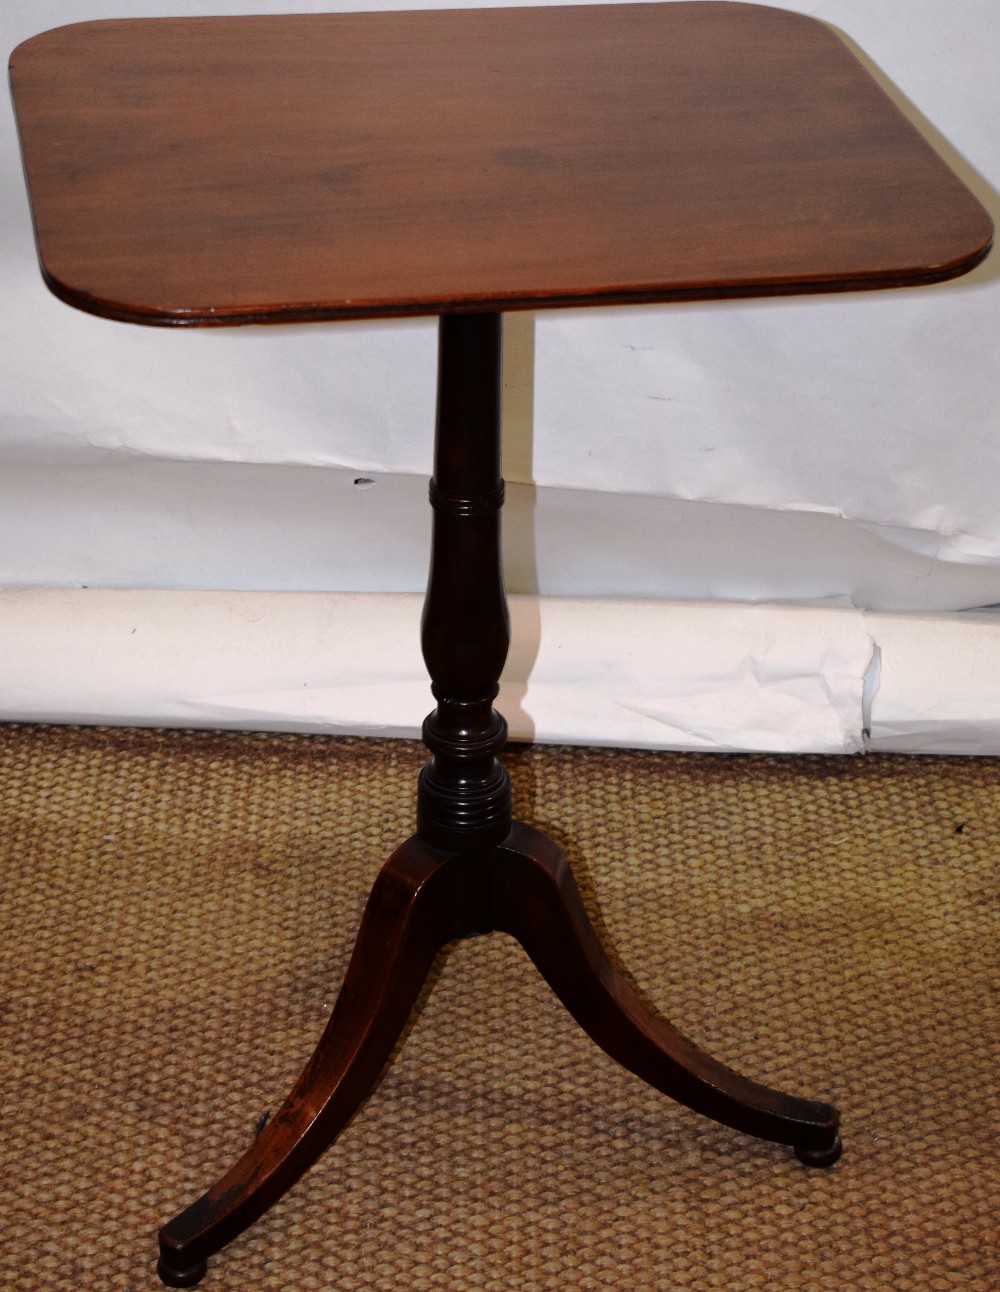 A Regency mahogany occasional table, the faded rectangular top with a fluted edge, the ring turned